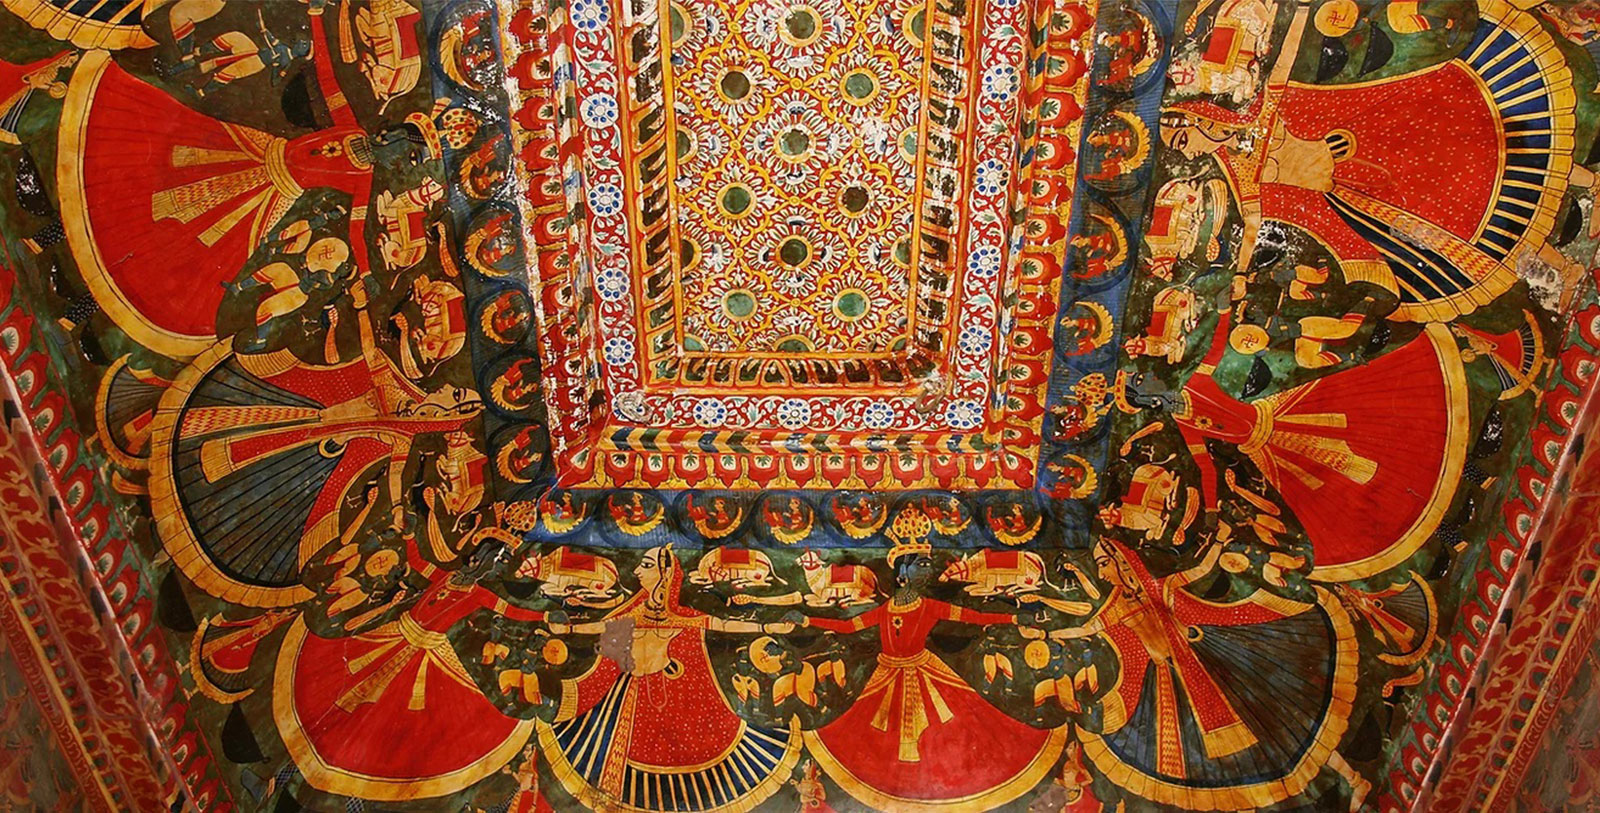 Experience the marvelous fresco painting at Khetri Mahal, or the Wind Palace.